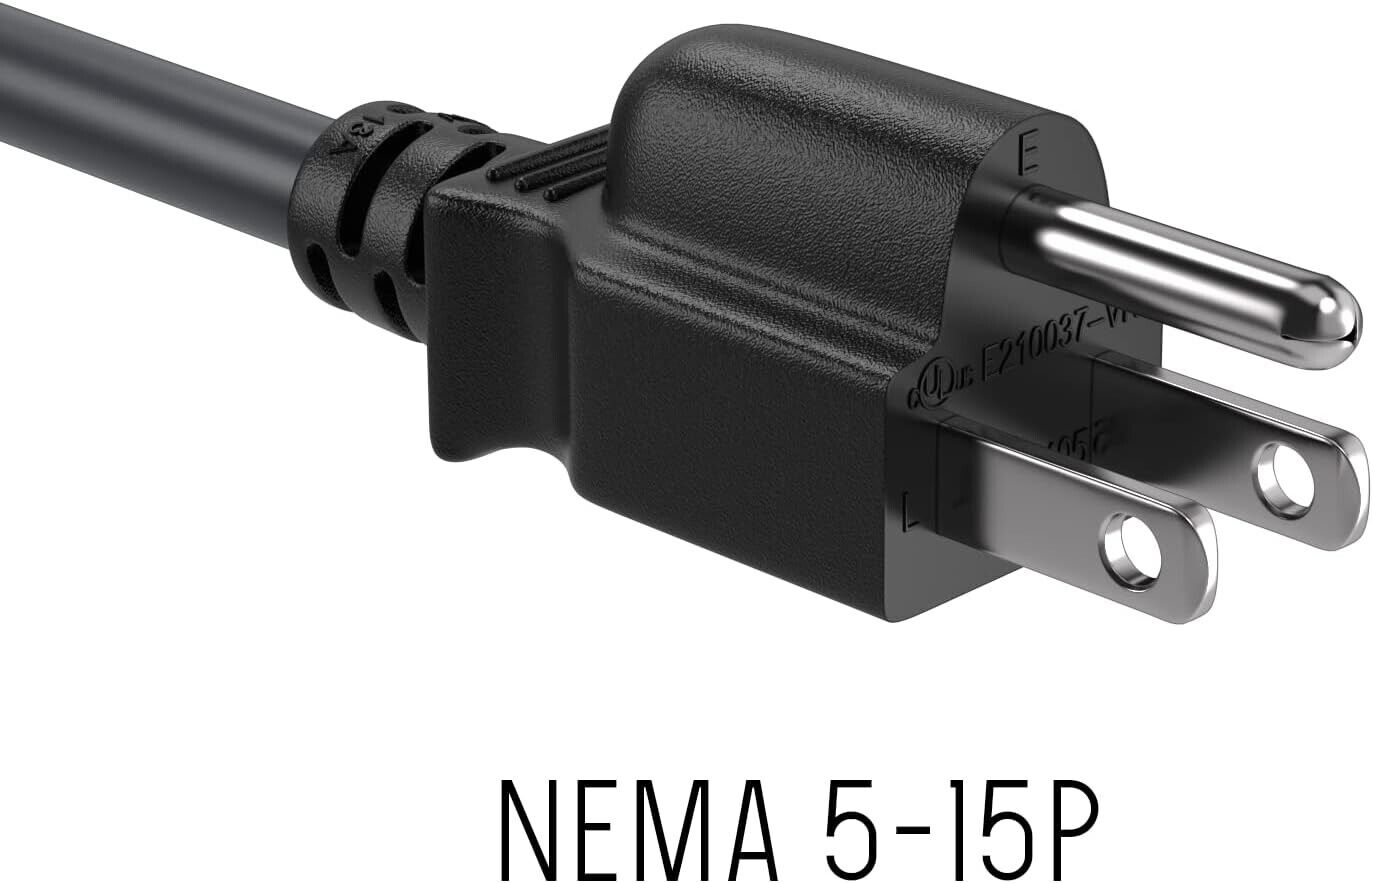 Simbr 2-ft 14 AWG 3-prong Outlet Saver Power Extension Cord NEMA 5-15P - 2 Pack